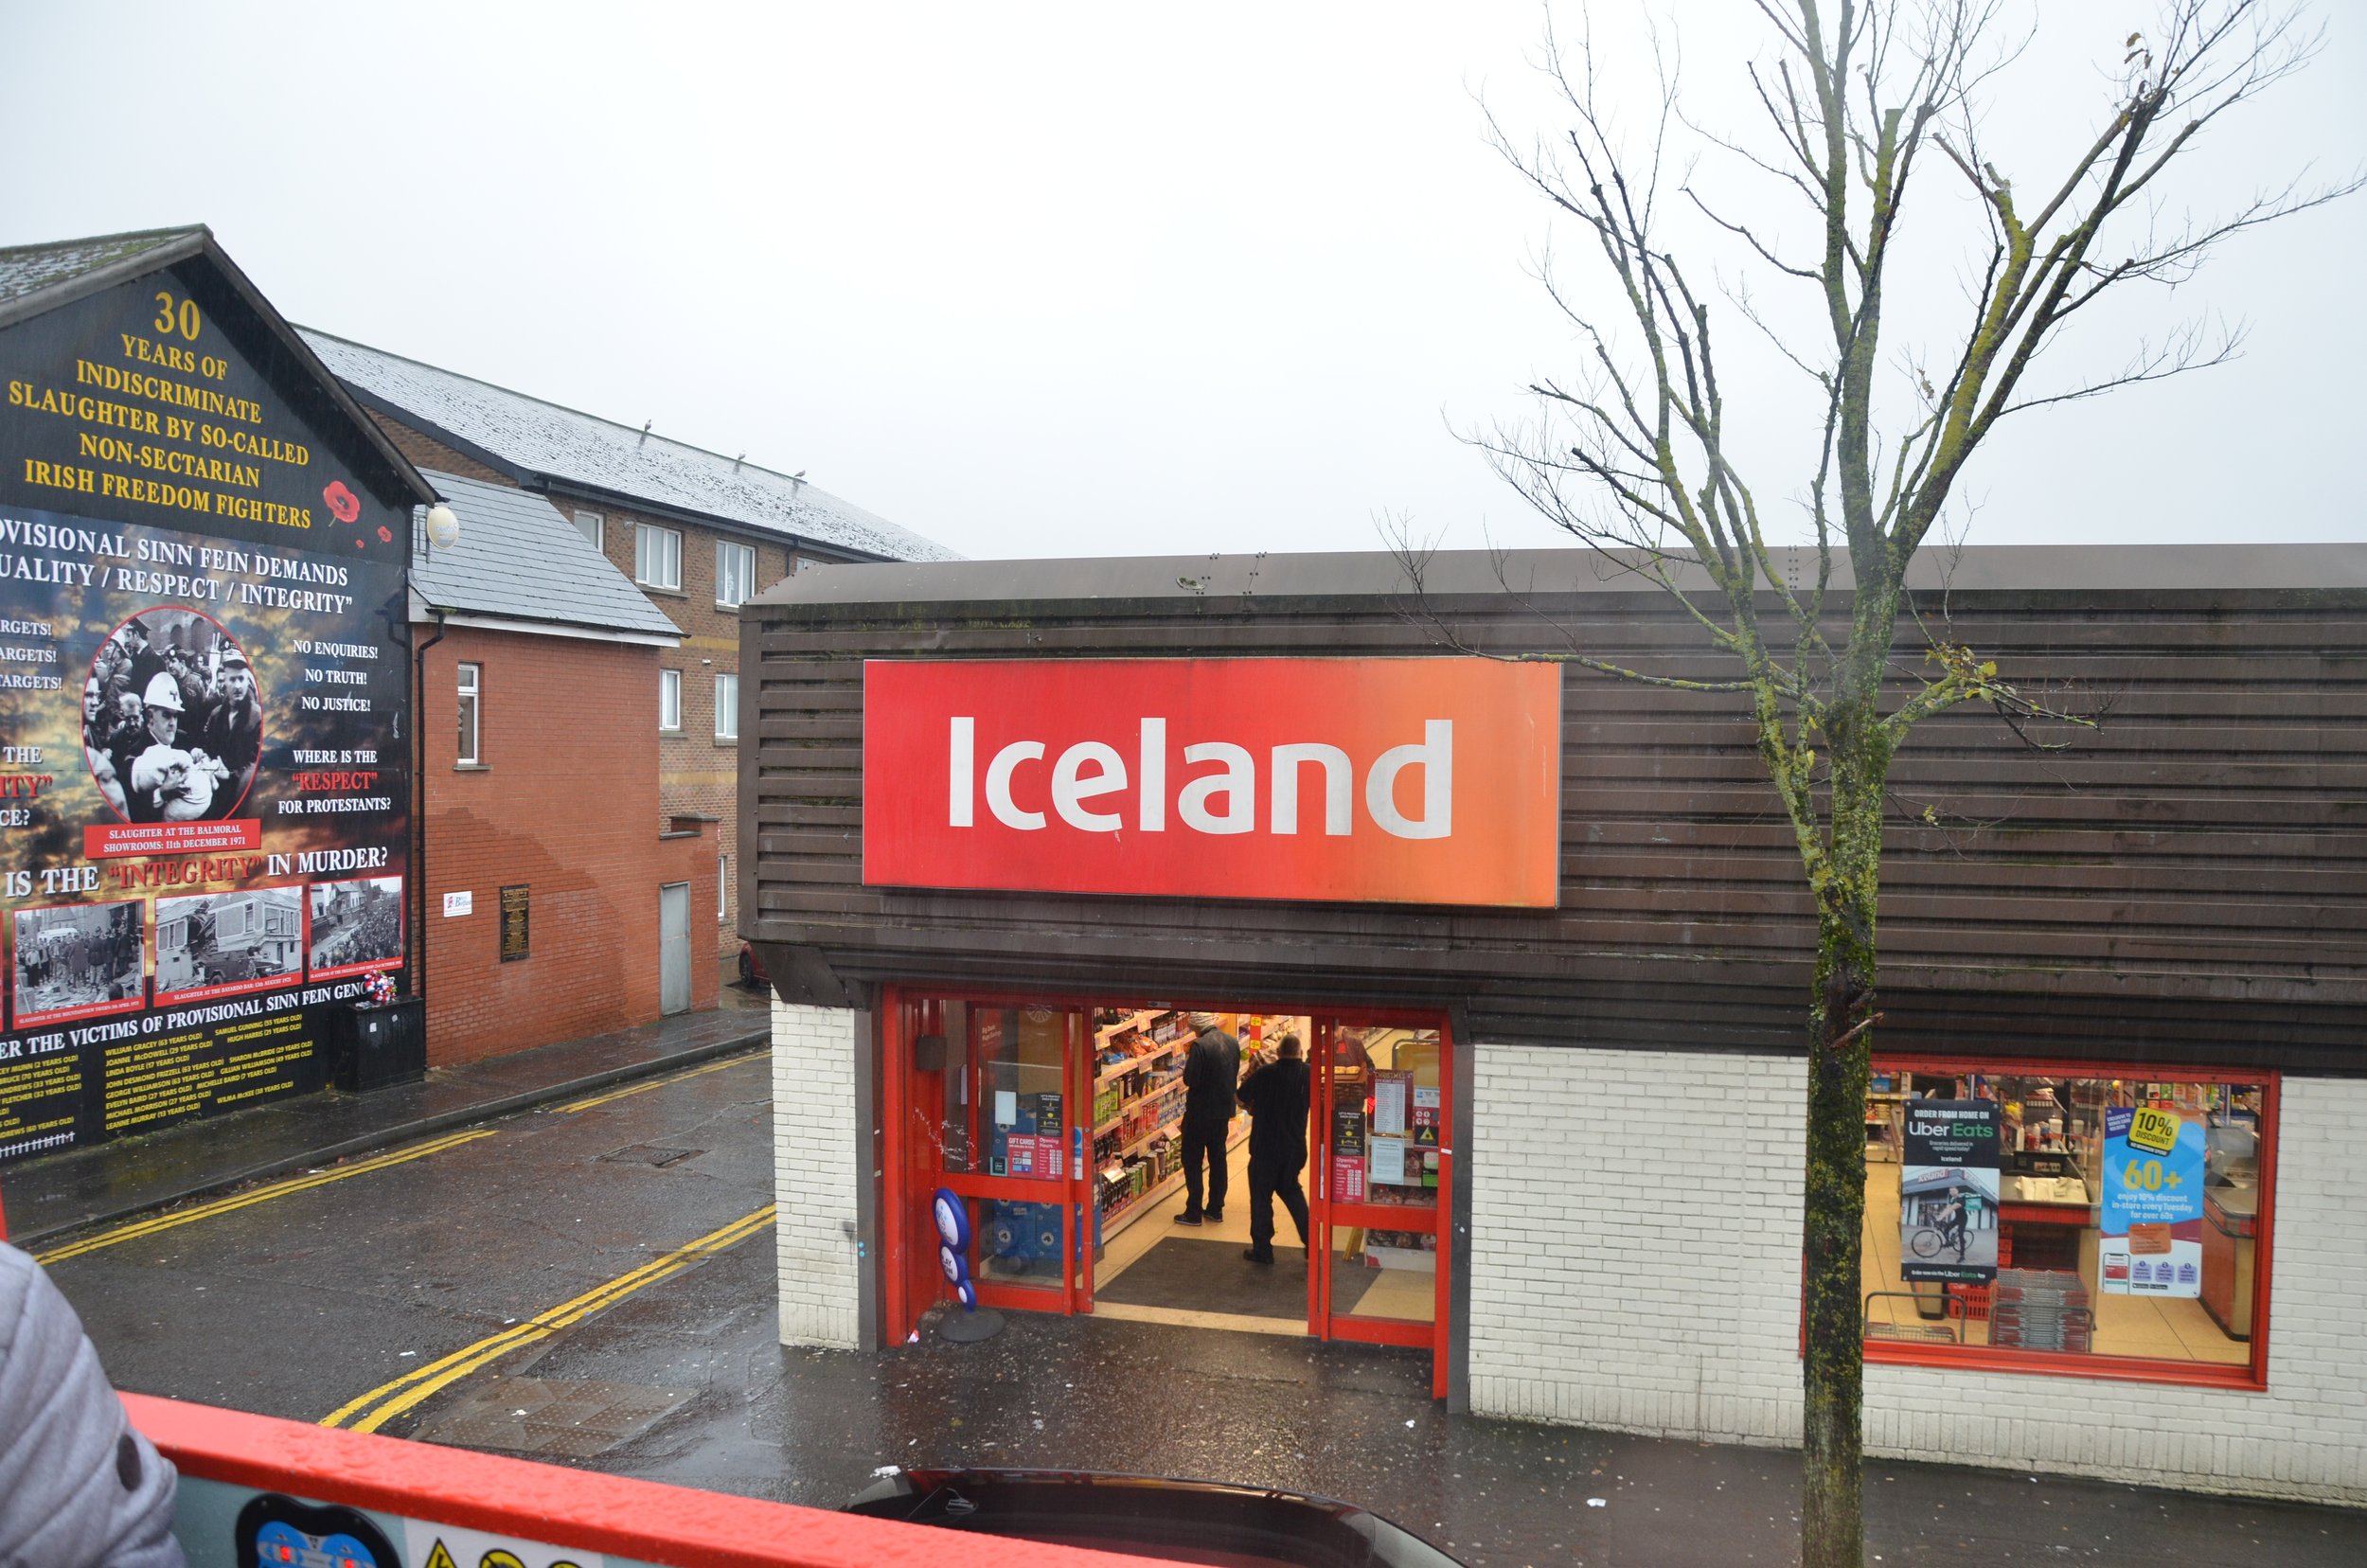  This was my first view of the “Iceland” supermarket, for a second I thought I was on a different island. 